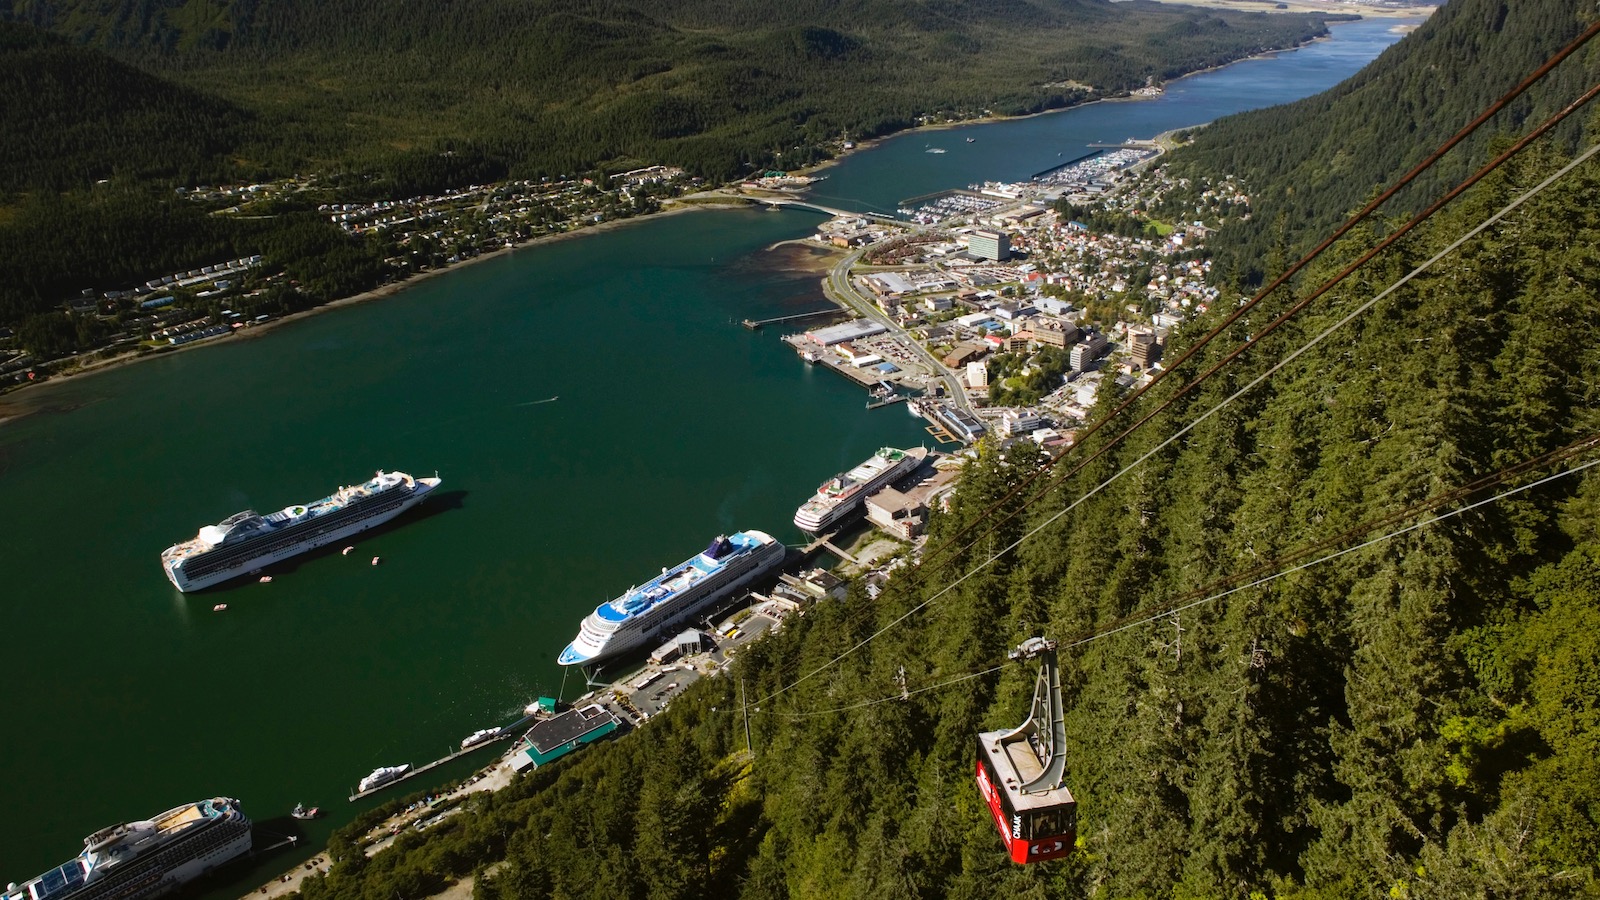 An aerial view of Juneau, Alaska nestled against a mountain with cruise ships on the waterfront.